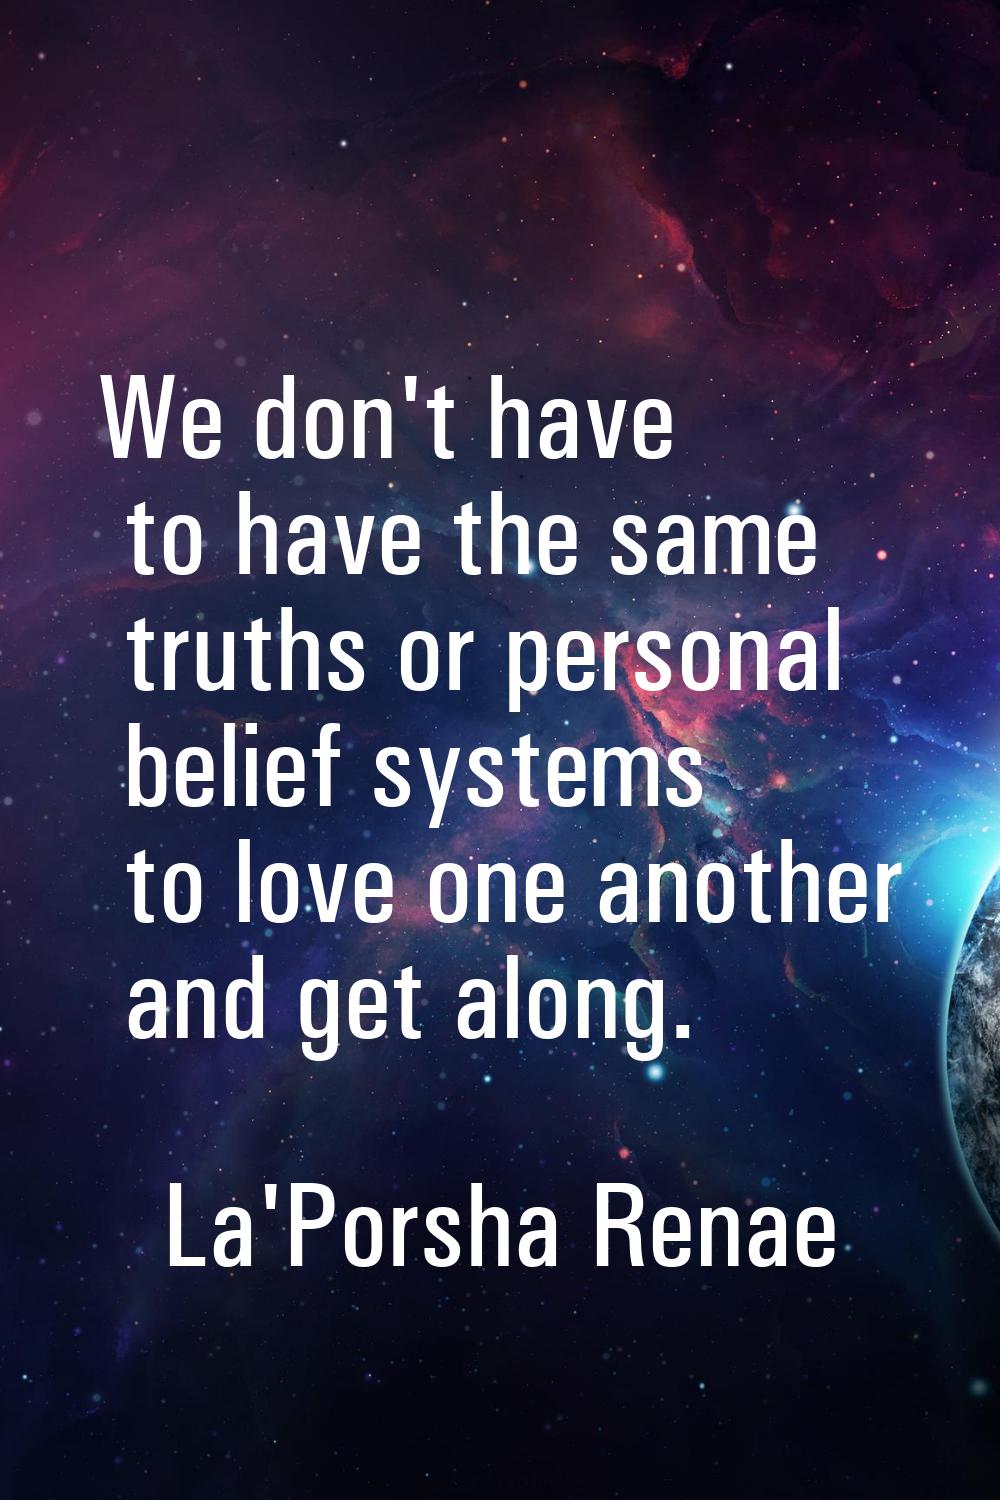 We don't have to have the same truths or personal belief systems to love one another and get along.